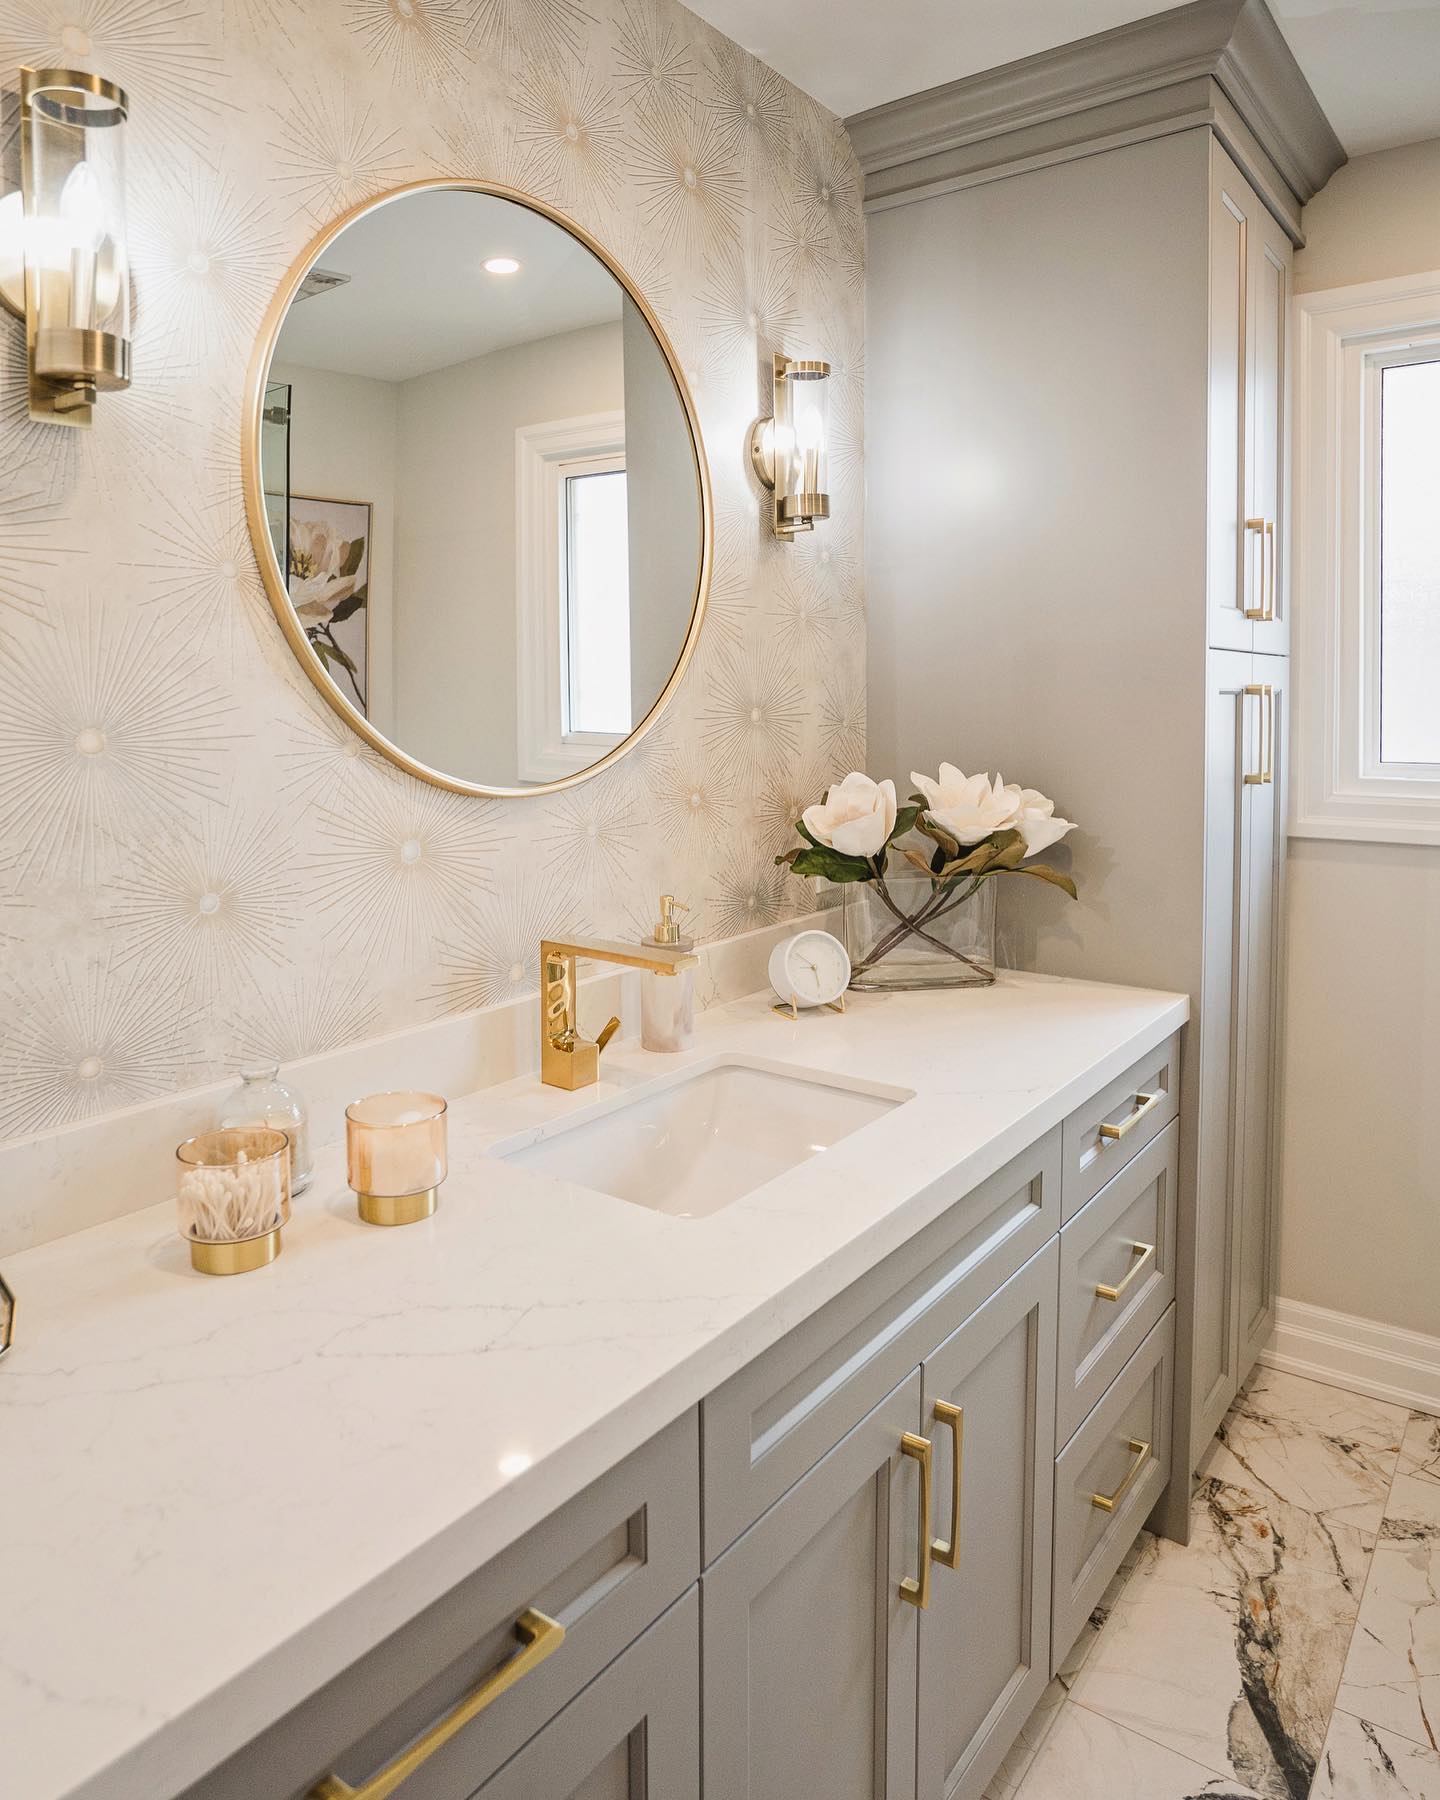 Bathroom Makeovers: Before and After Transformations That Will Leave You Speechless